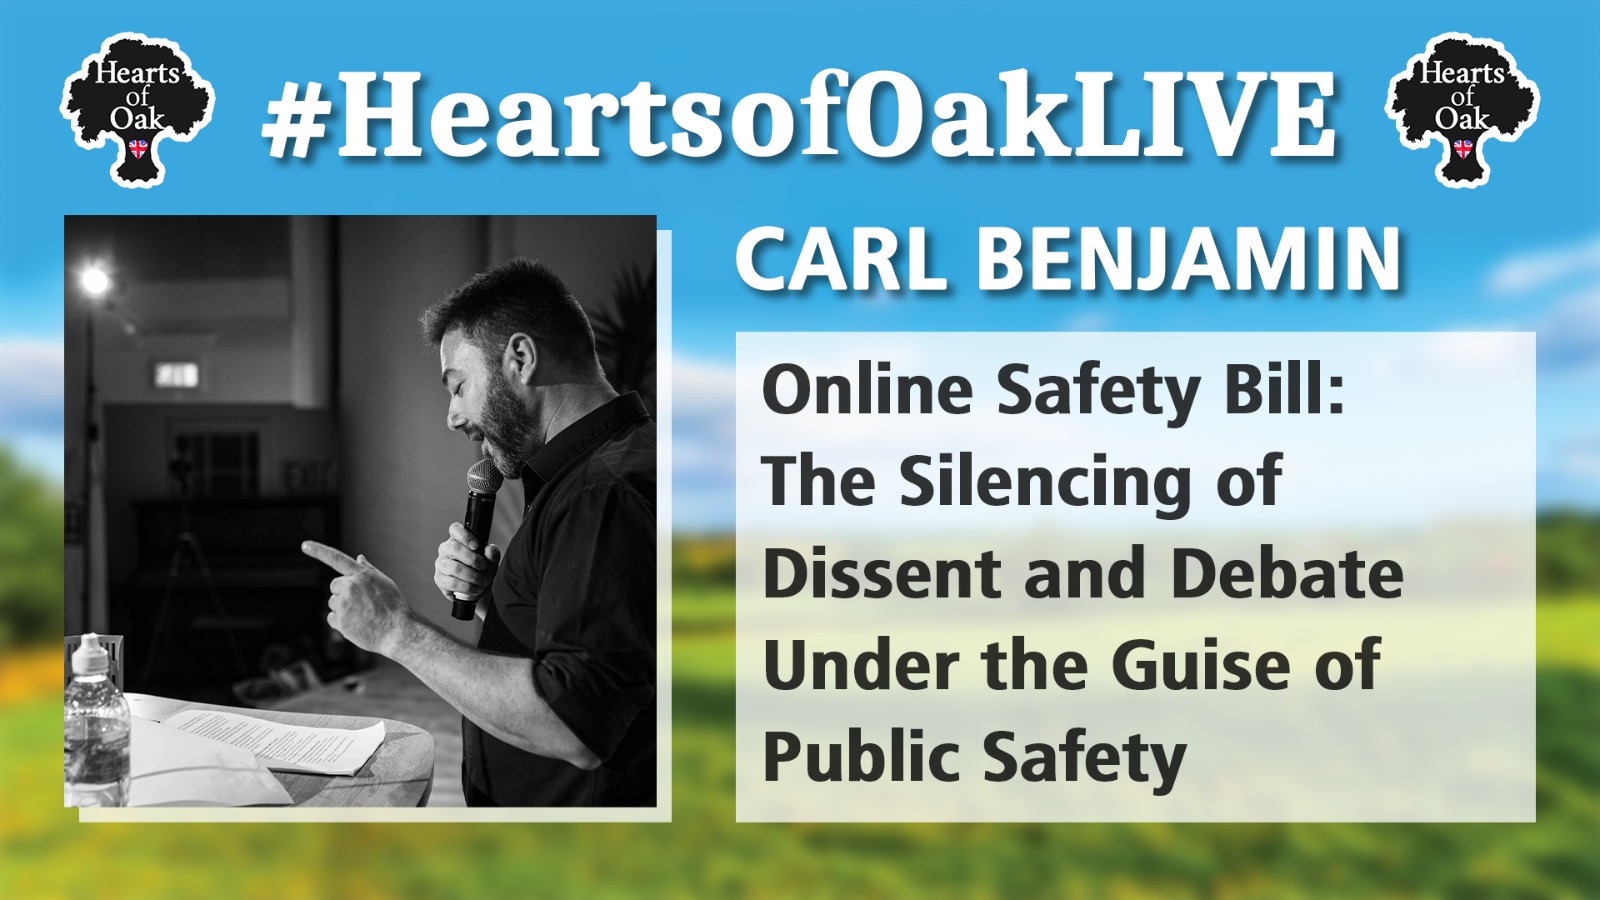 Carl Benjamin - Online Safety Bill: The Silencing of Dissent & Debate Under the Guise of Public Safety